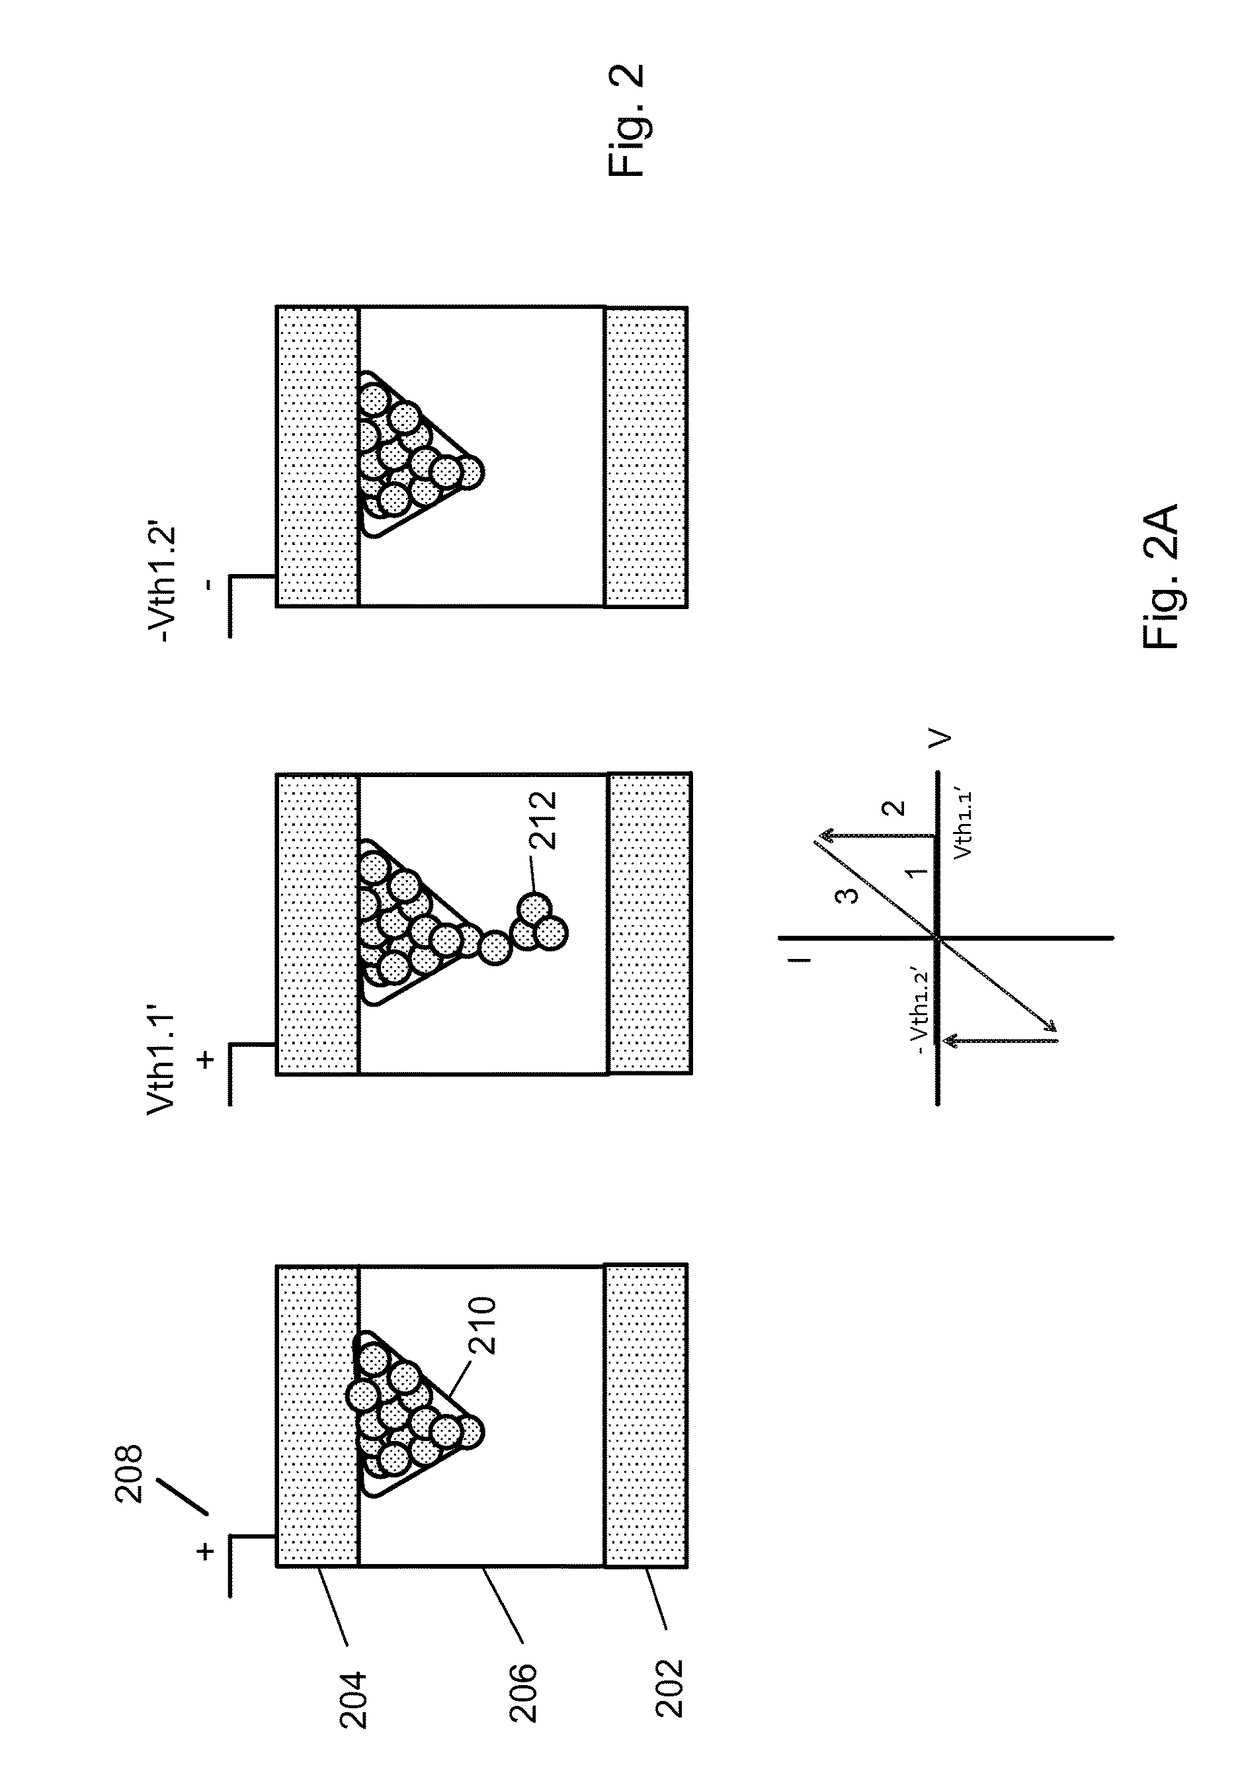 Hetero-switching layer in a RRAM device and method